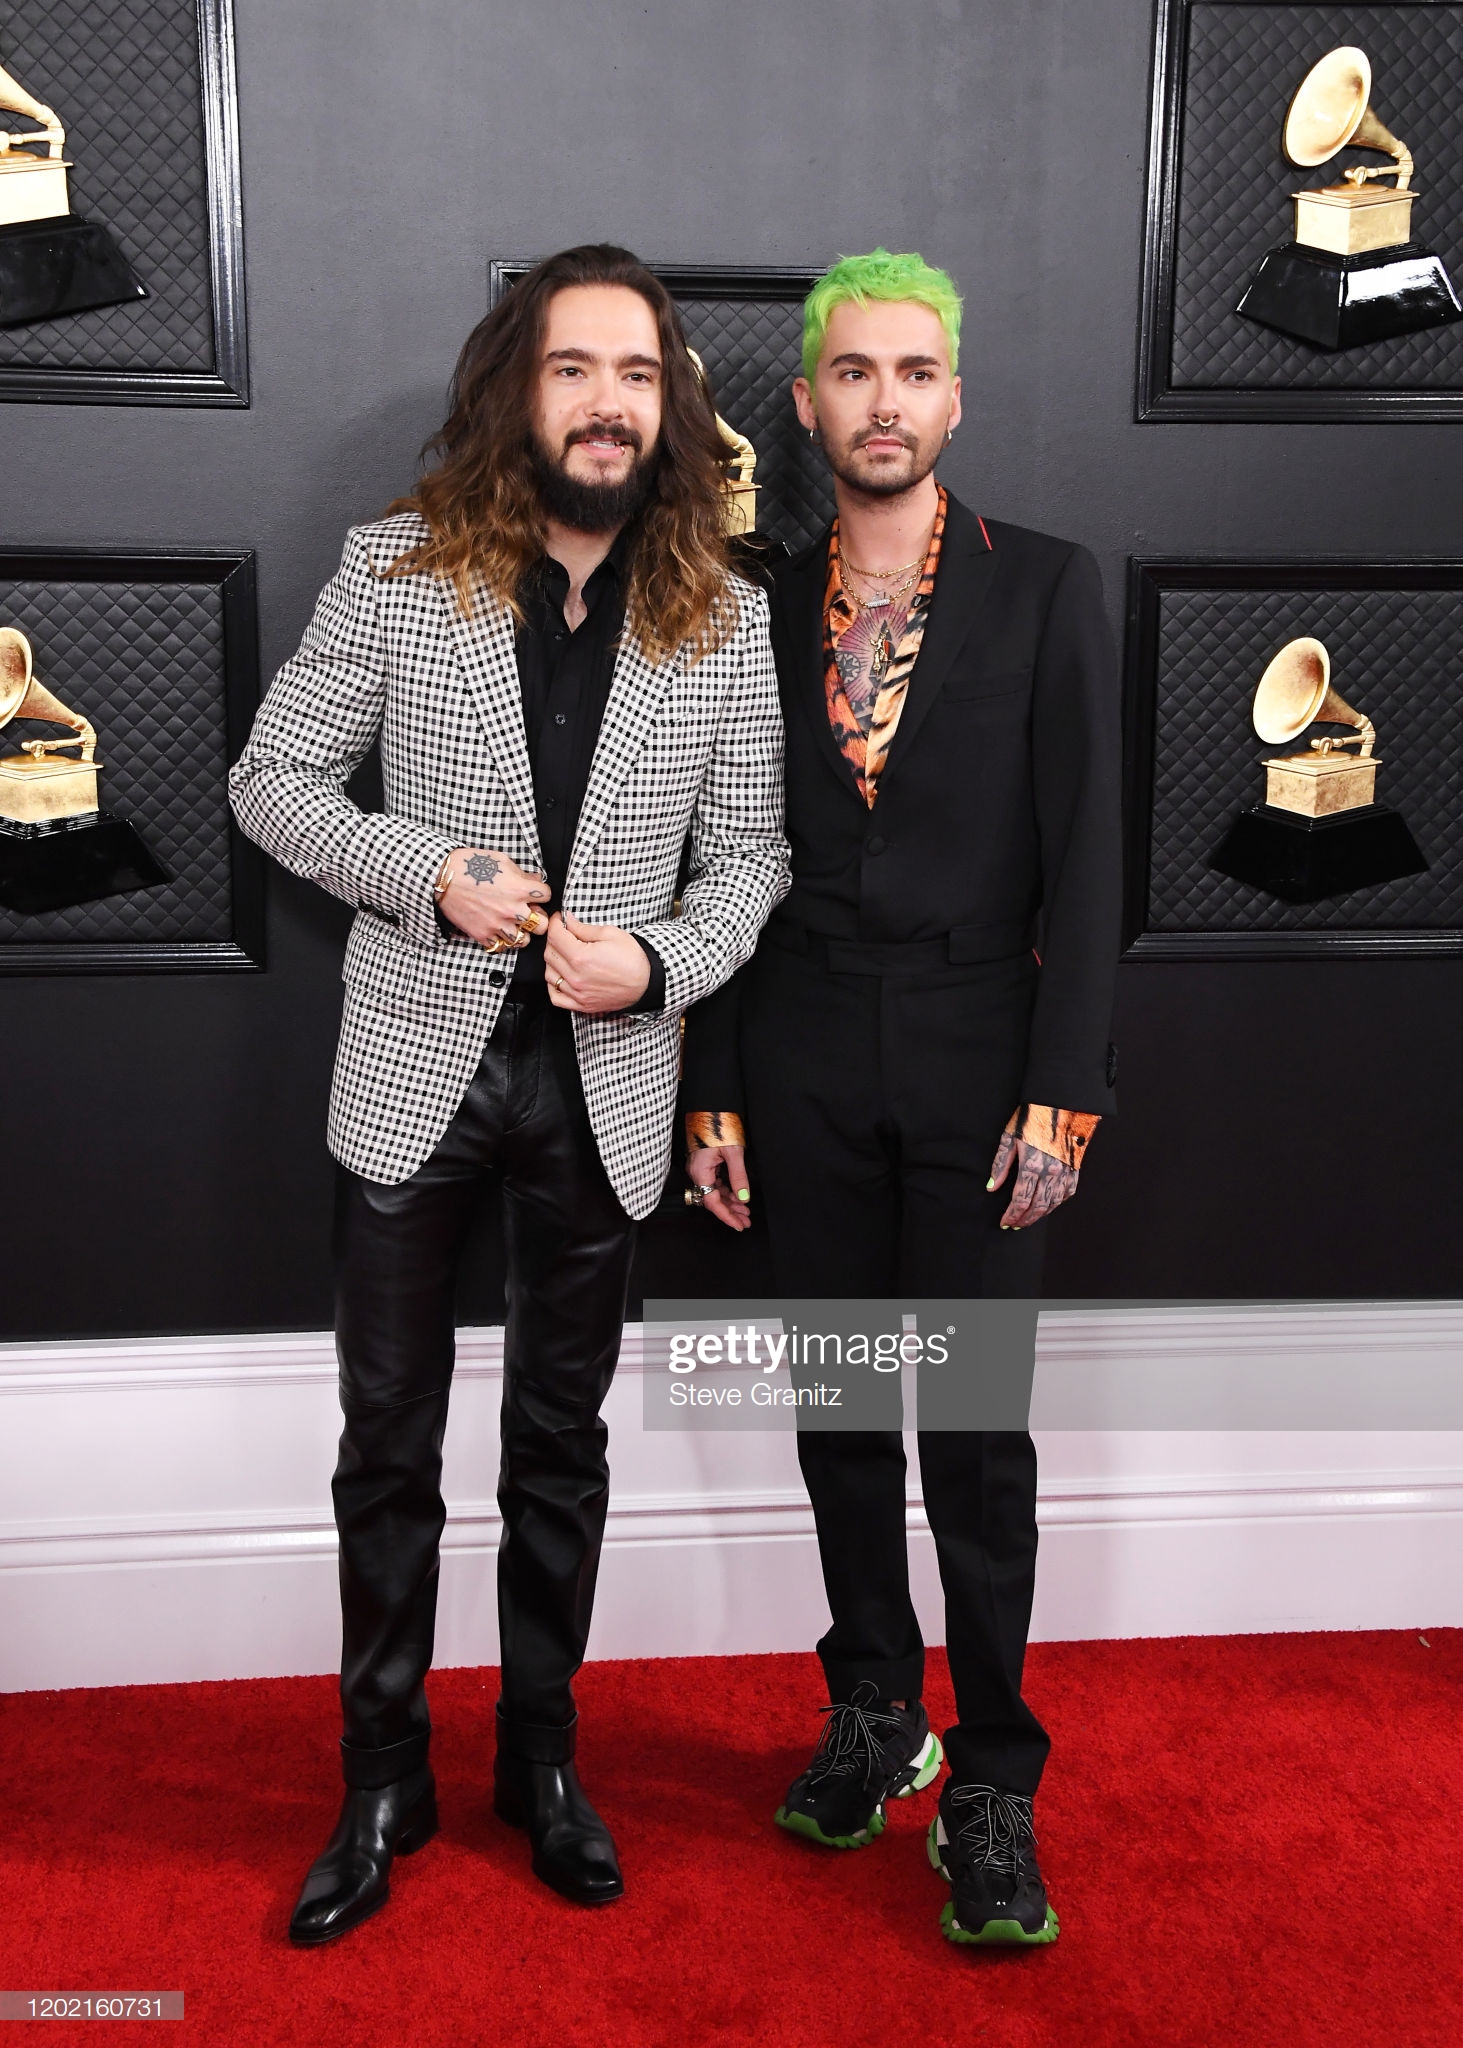 26.01.20 - Bill and Tom at Grammys, Red Carpet, Staples Centre, LA